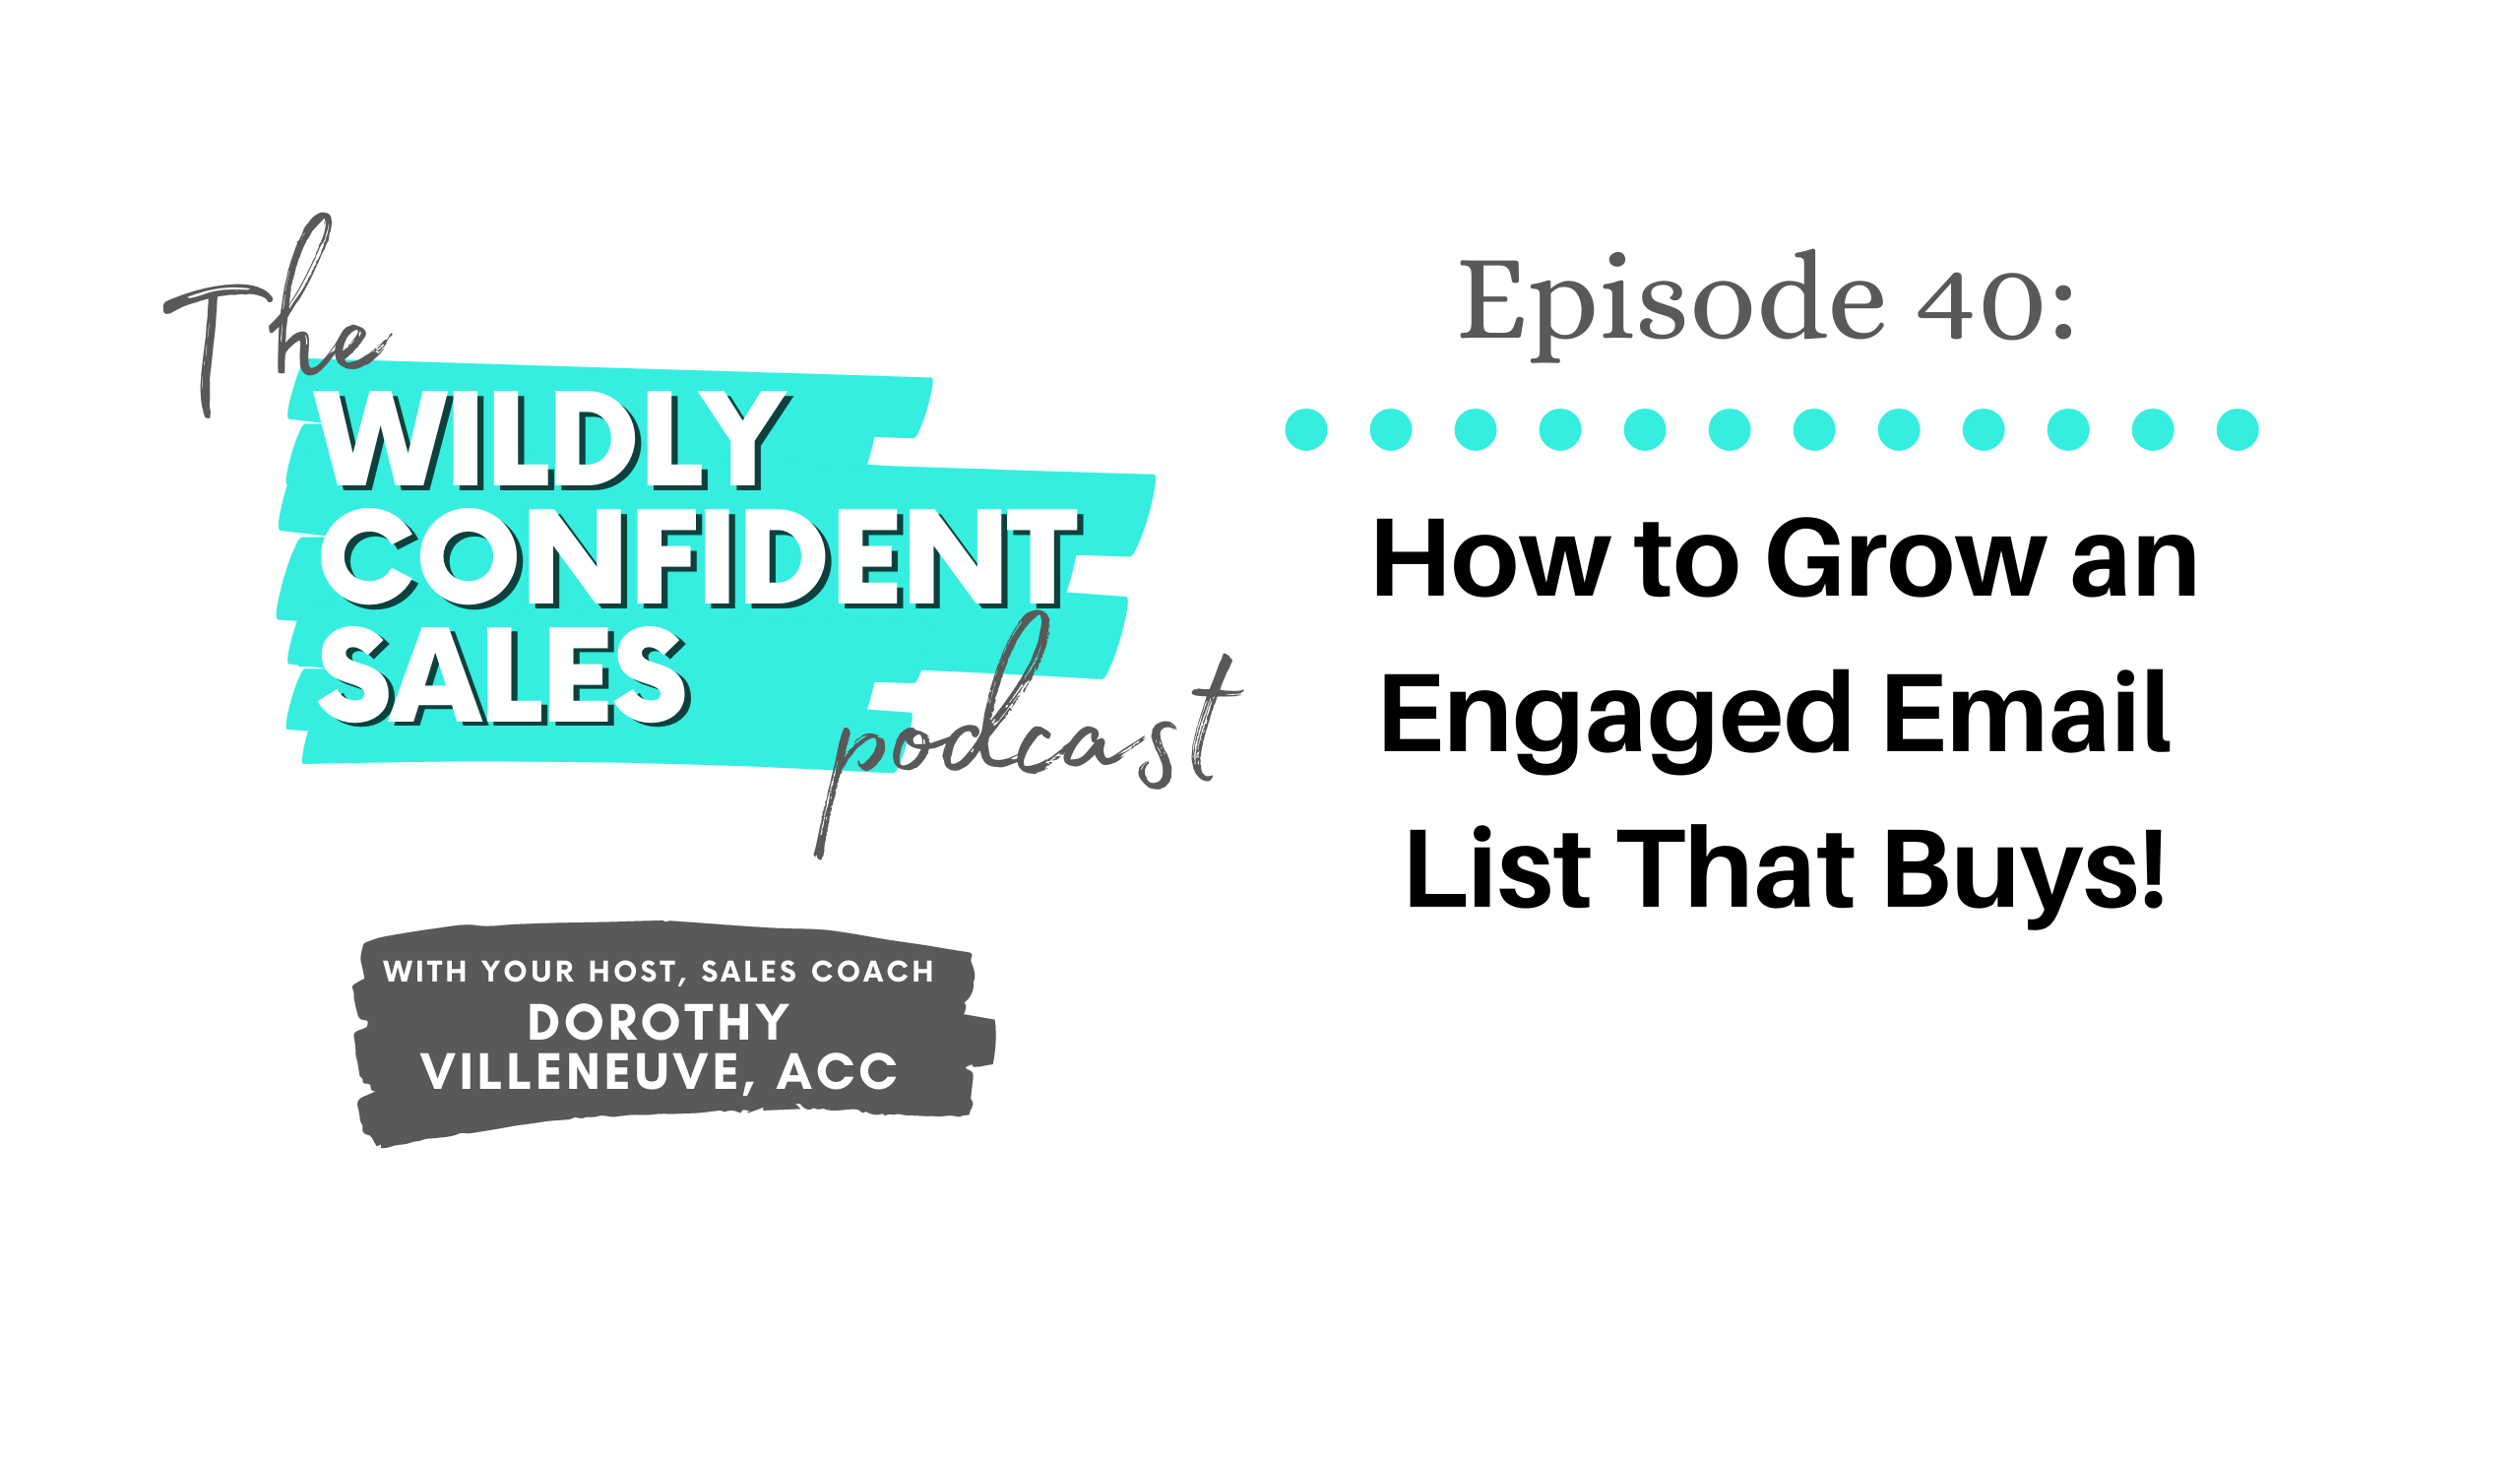 How to Grow an Engaged Email List that Buys - Wildly Confident Sales with Dorothy Villeneuve